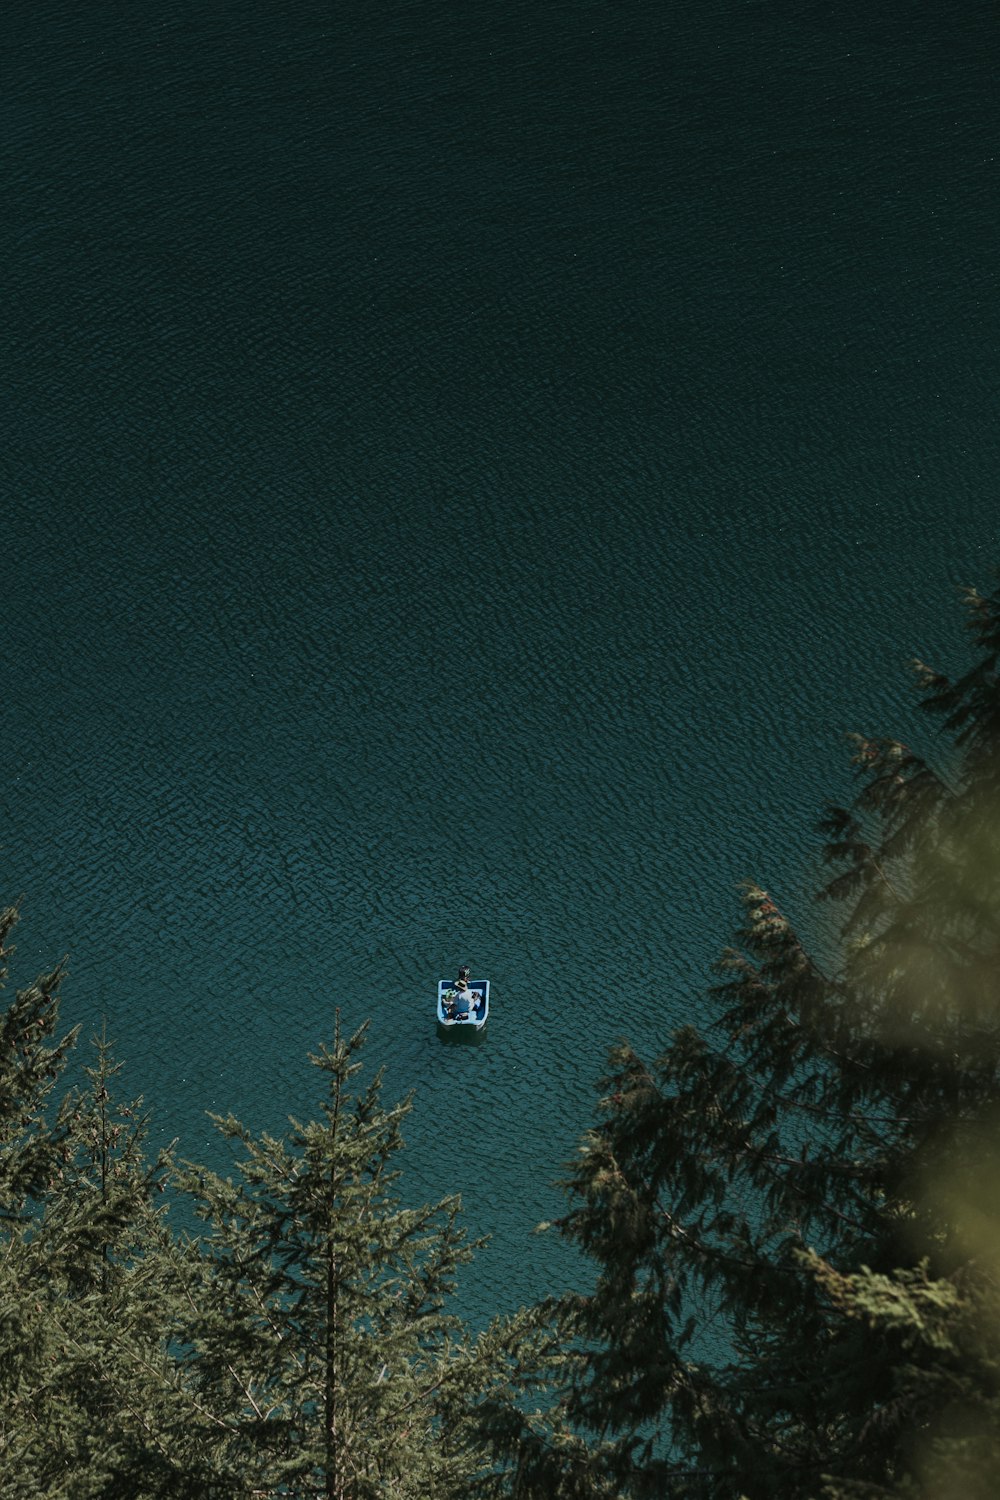 bird's eye view of person on boat on calm body of water